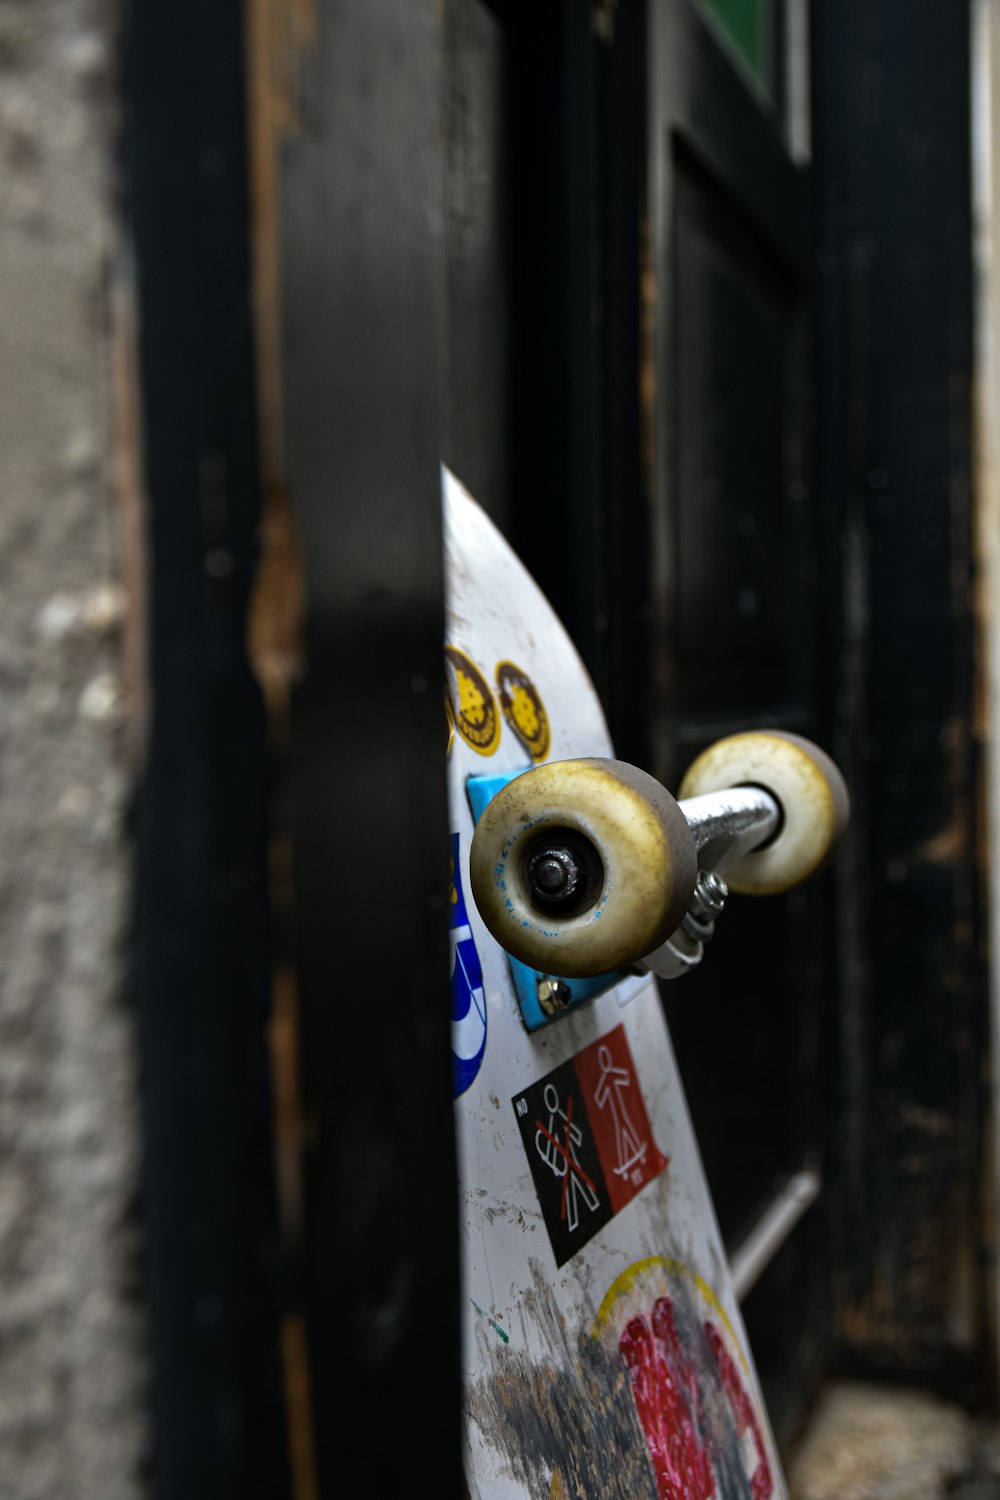 a close up of a skateboard with graffiti on it